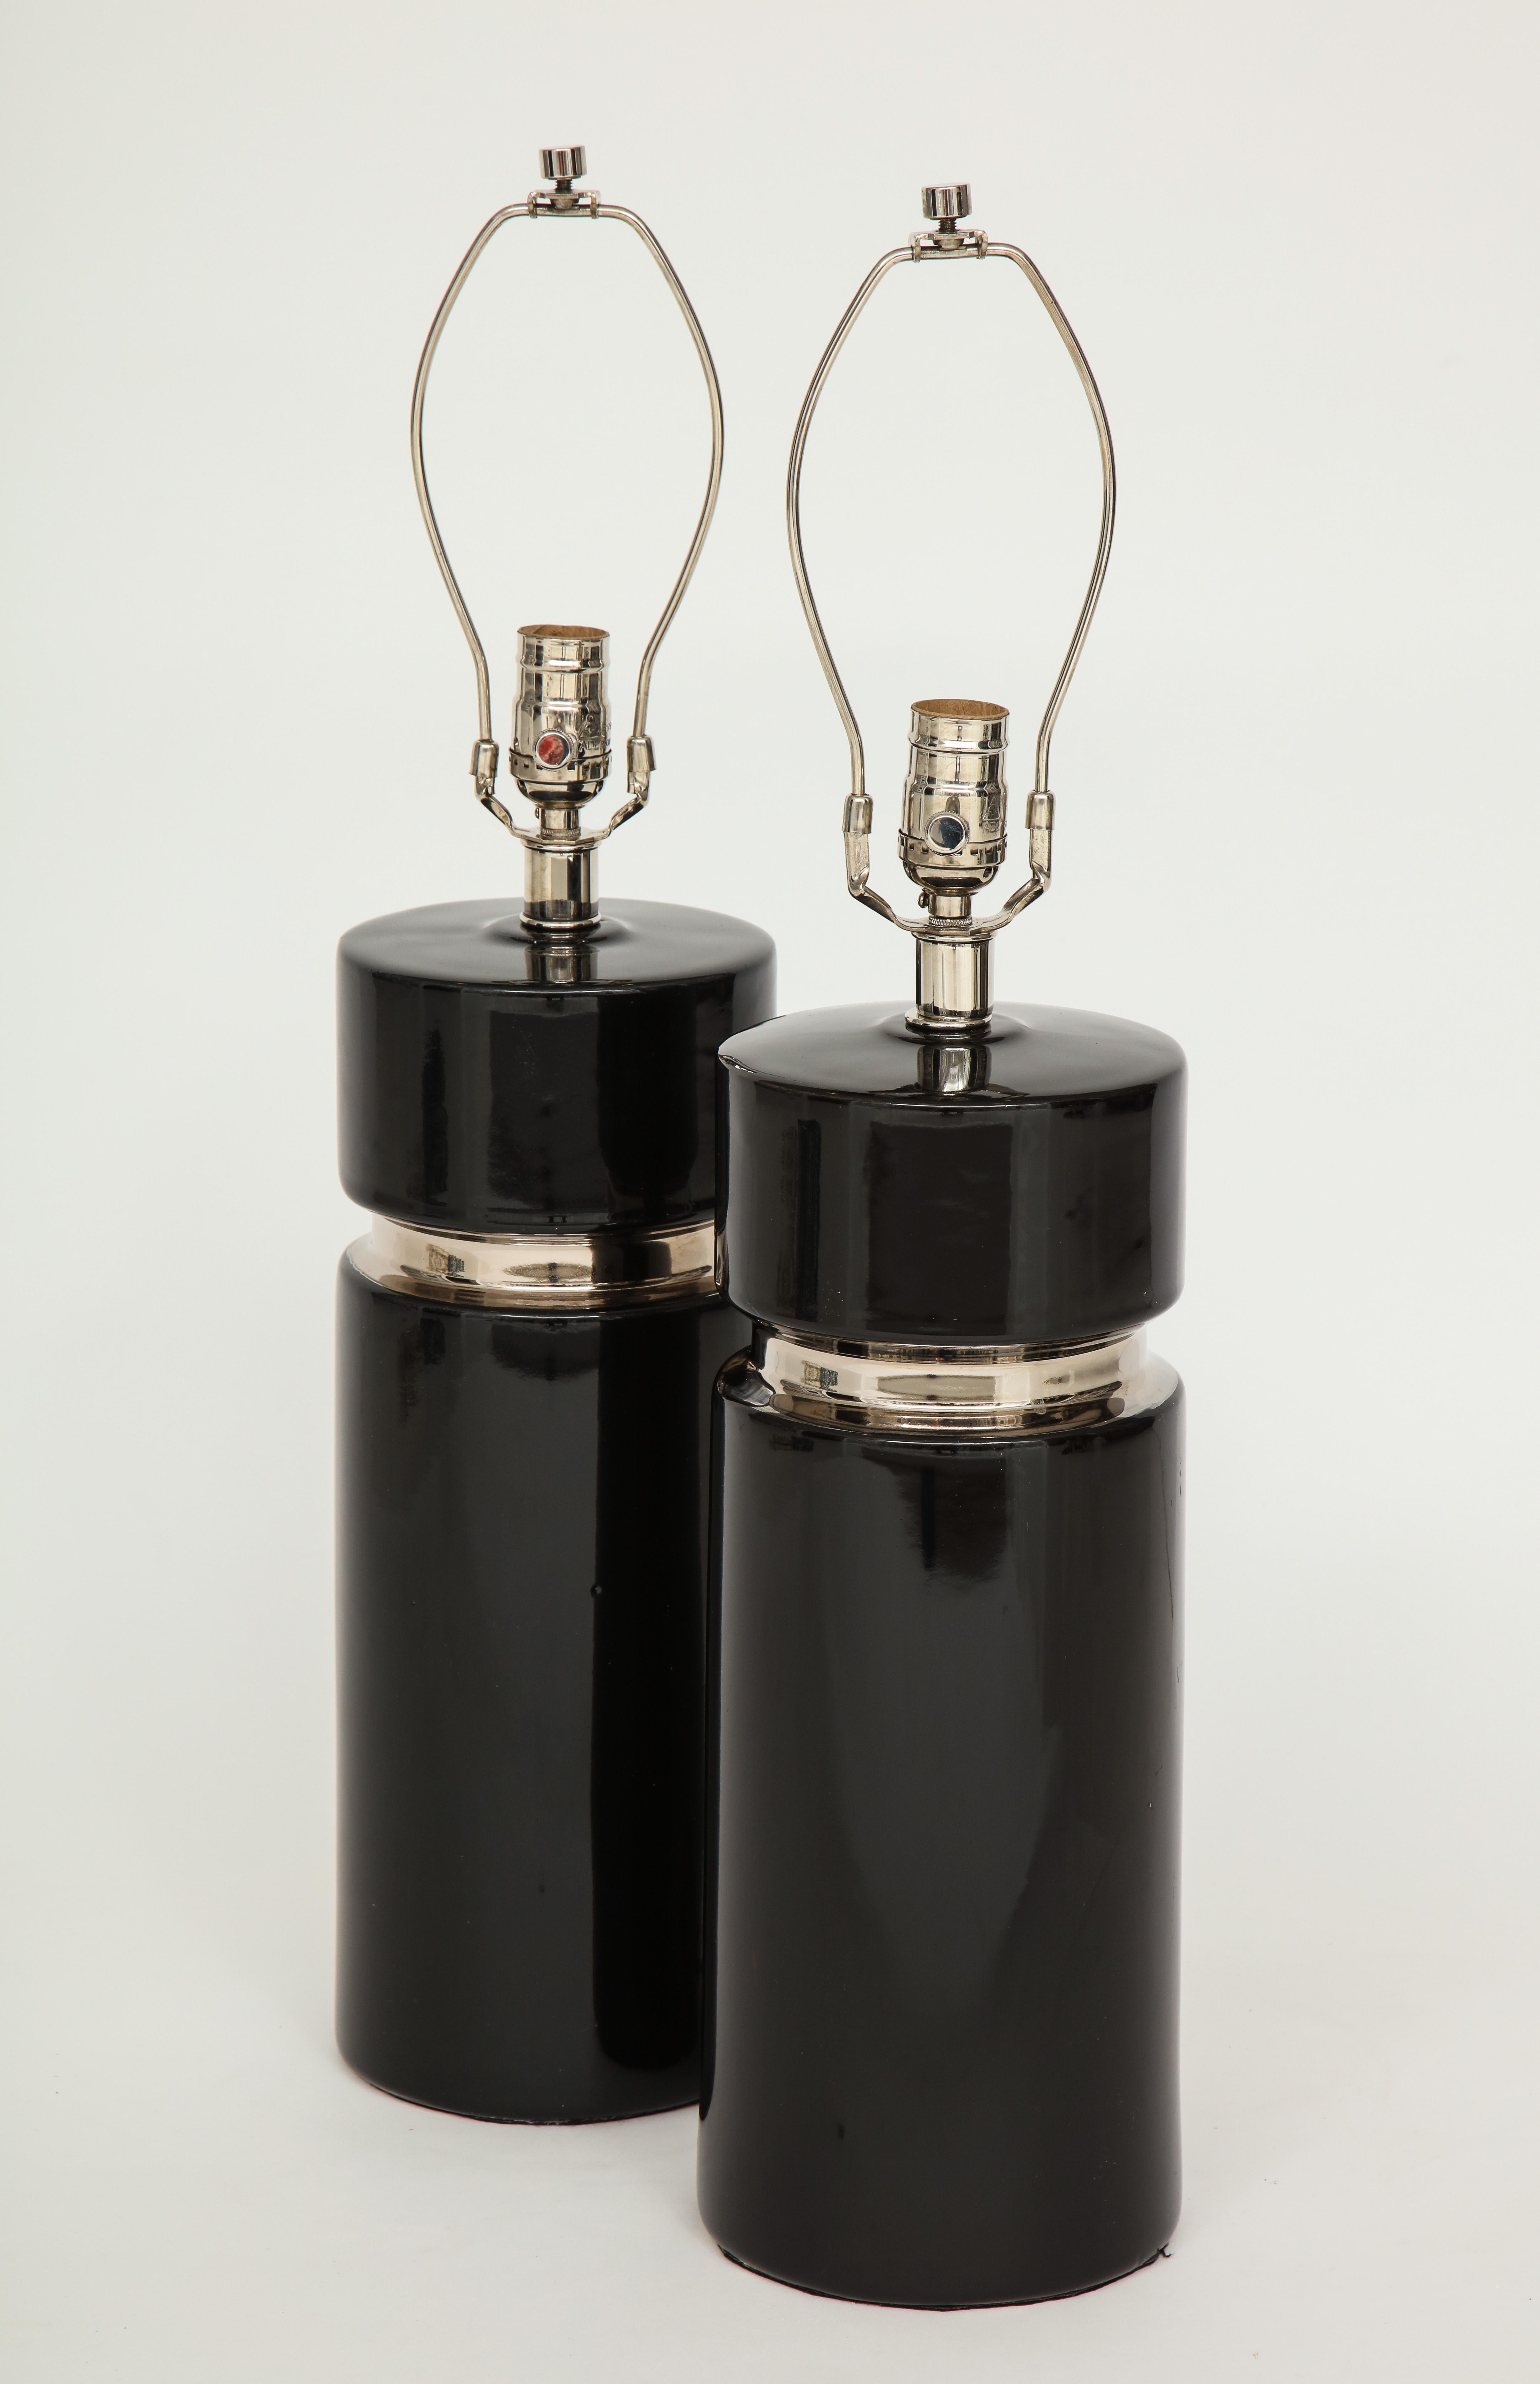 Midcentury black ceramic column form lamps with applied platinum banding. Rewired for use in the USA, 100W max.